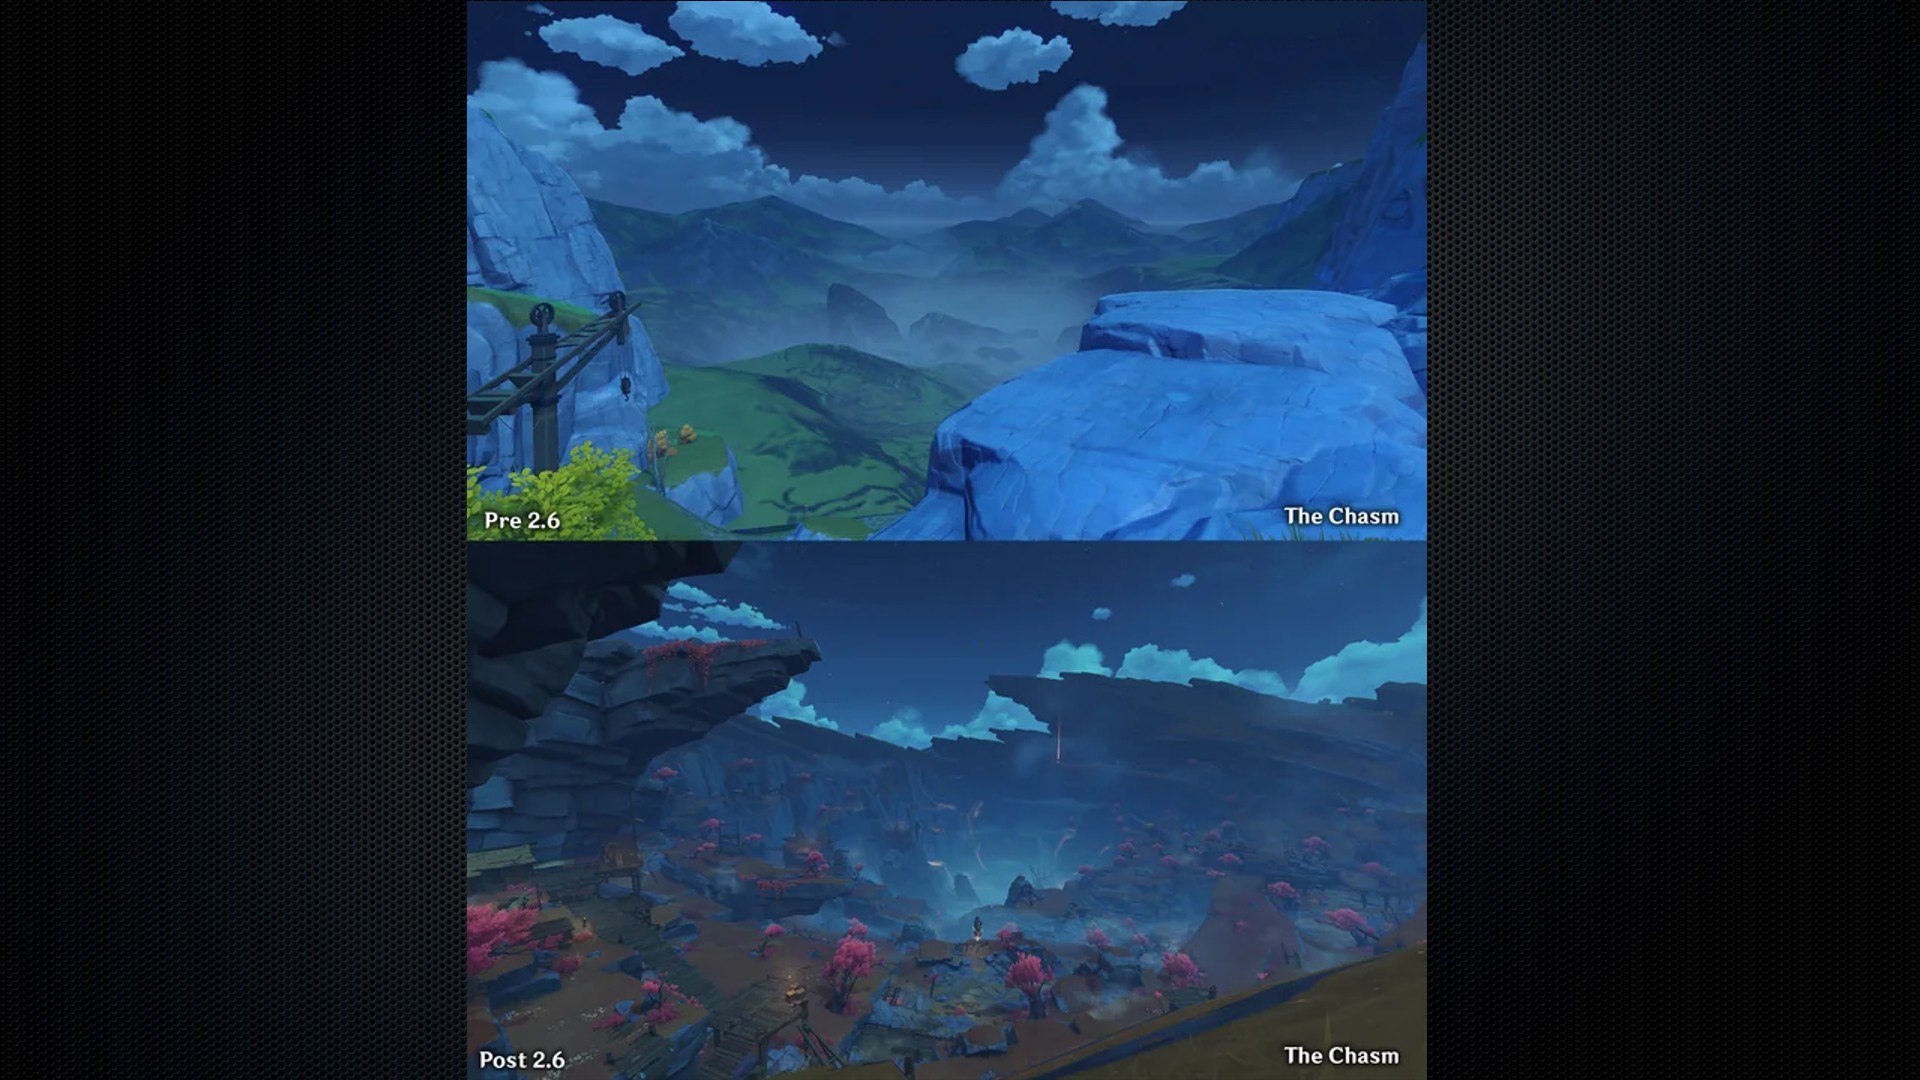 Genshin Impact before and after shows just how beautiful it's become: game scenery before and after chasm